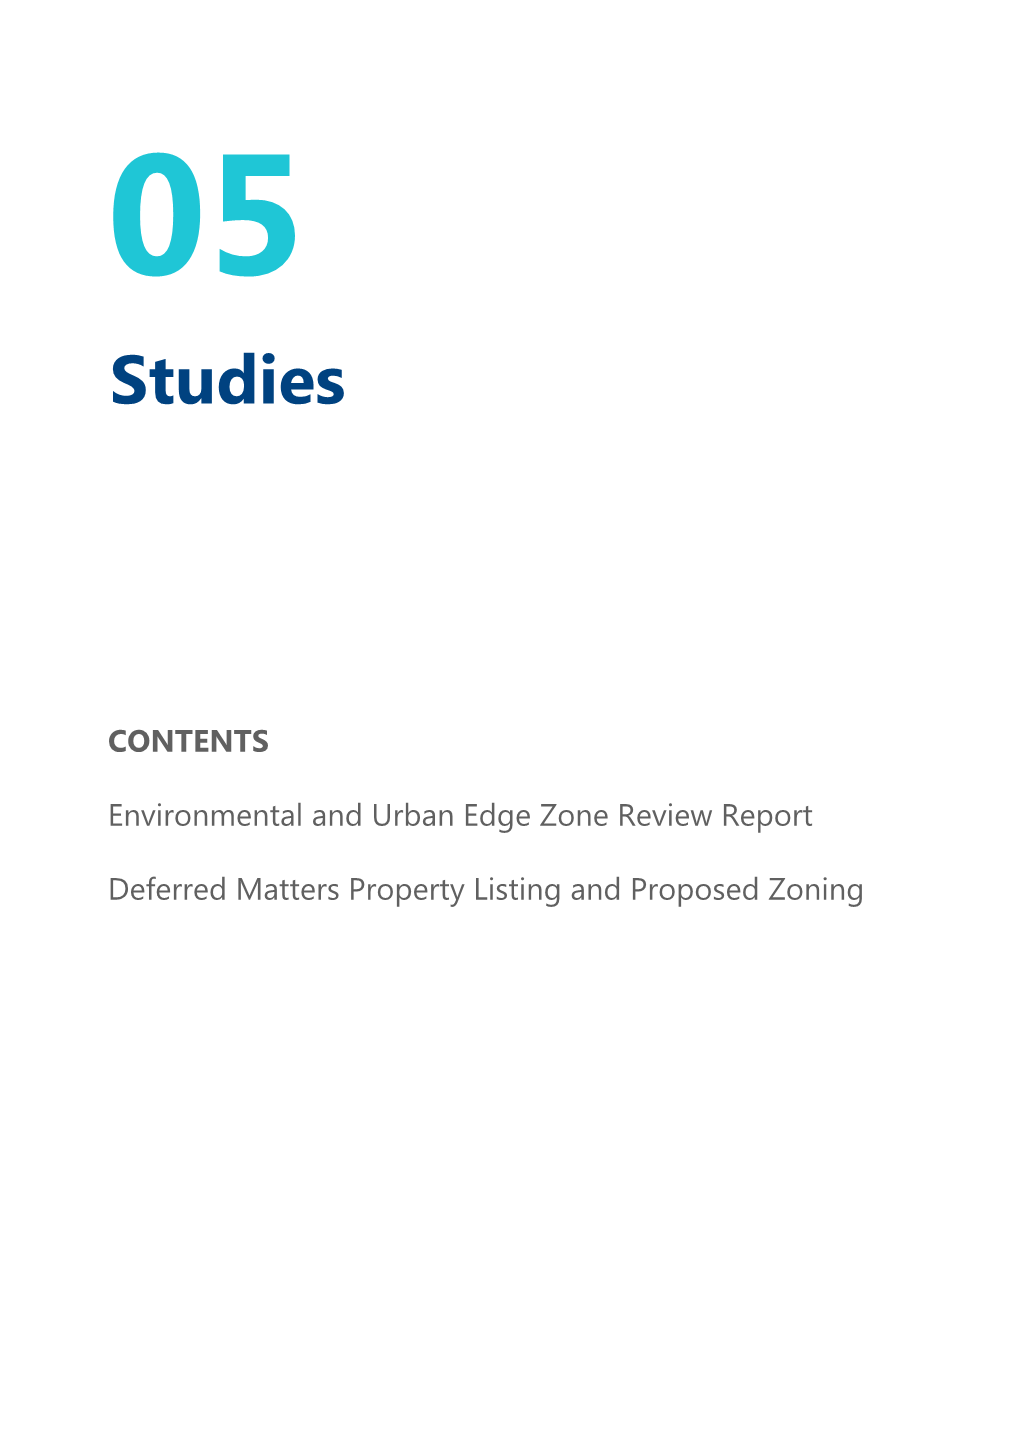 Environmental and Urban Edge Zone Review Report